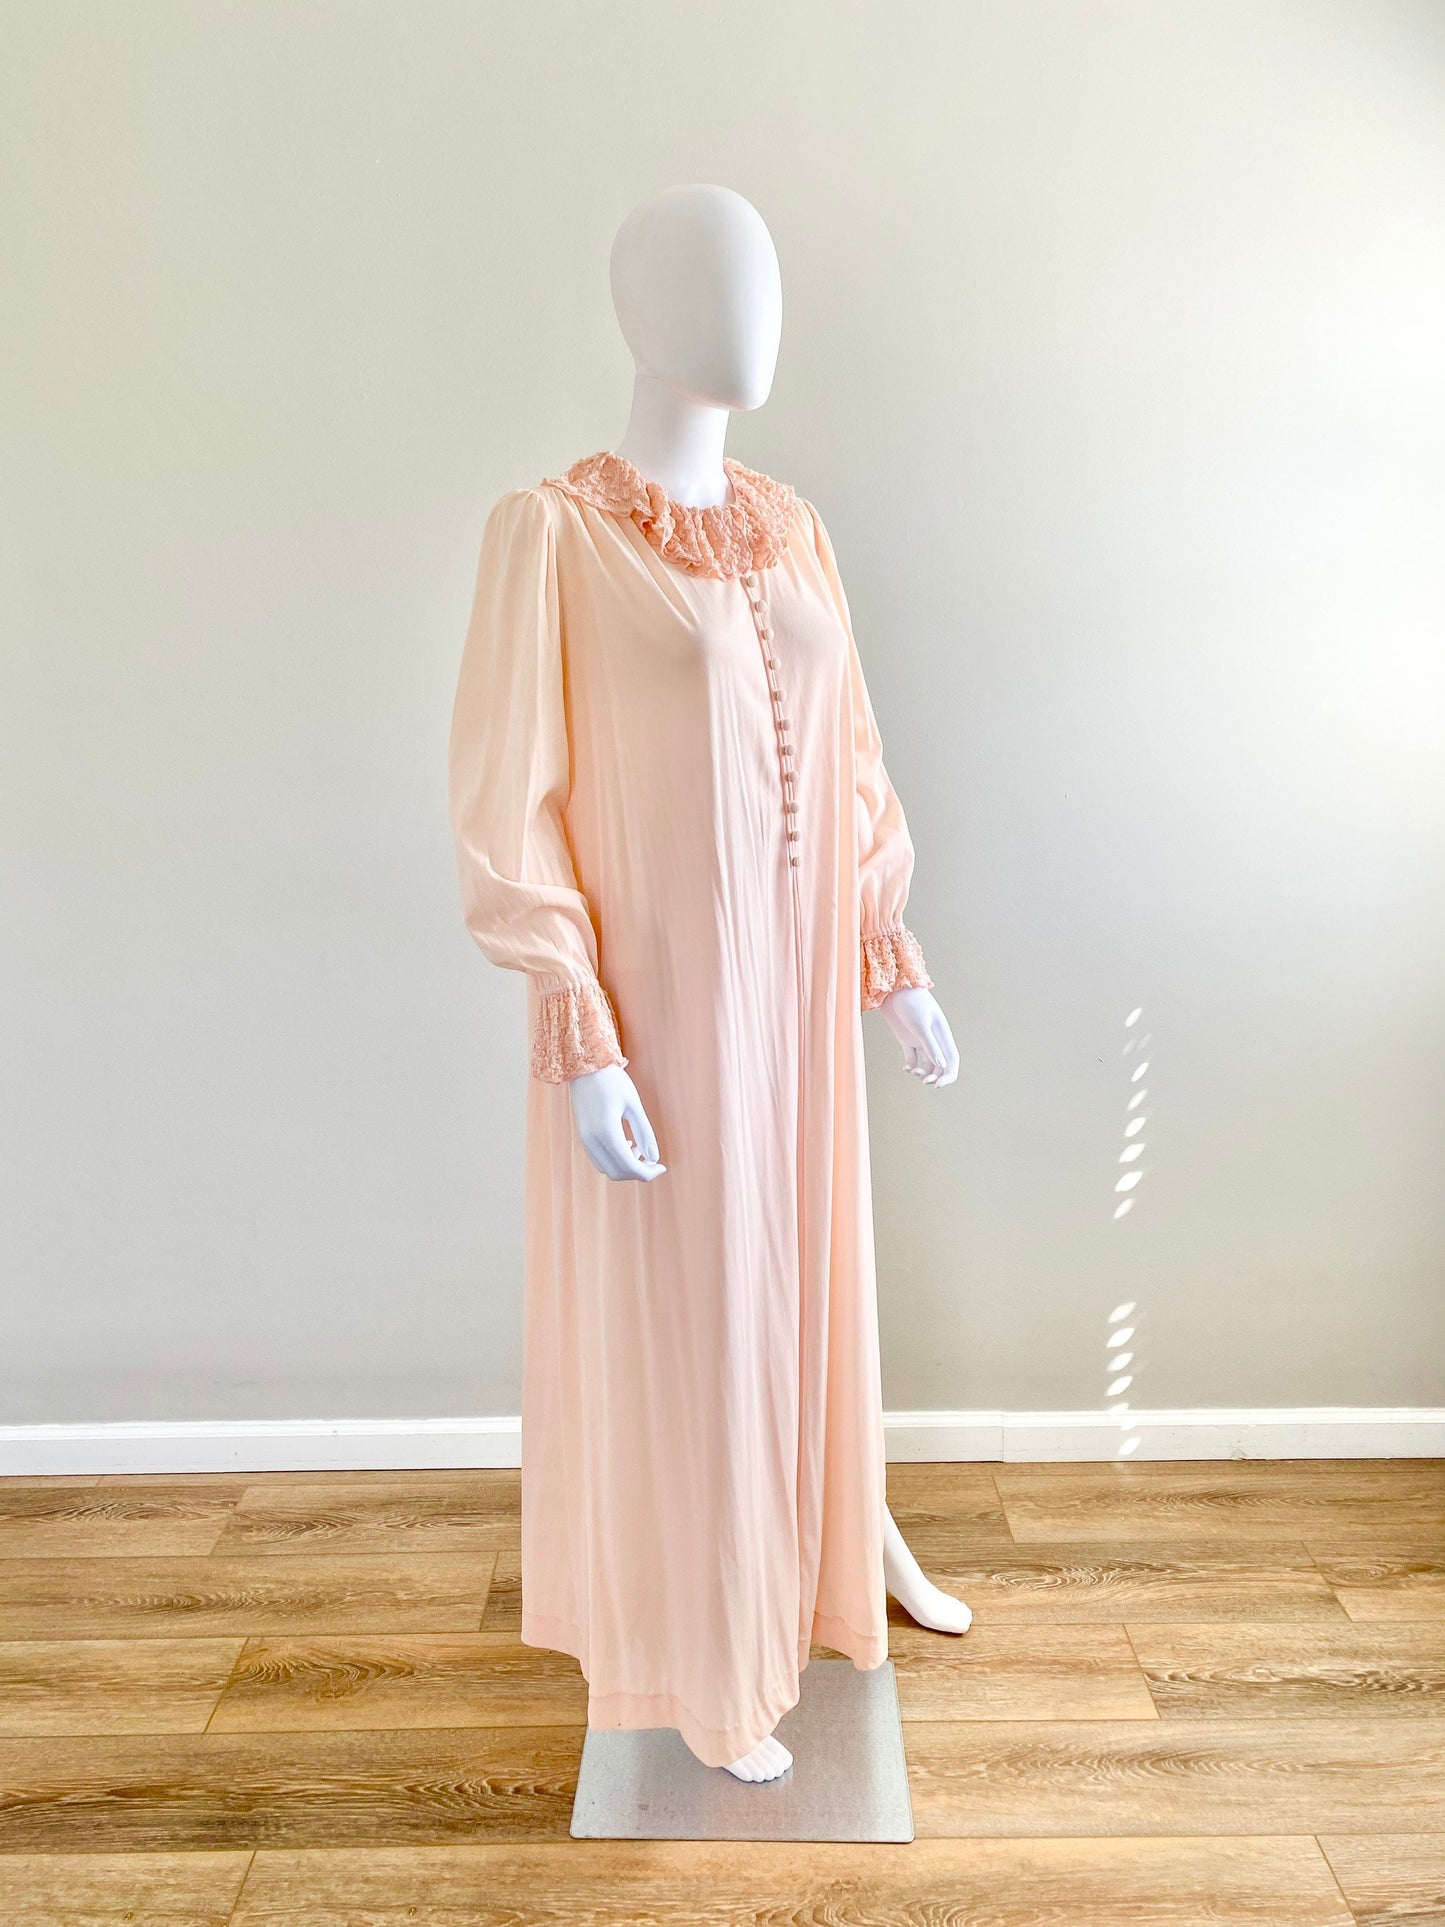 Vintage 1960s Pink Dressing Gown with Ruffled Collar / 60s retro robe / Size M L